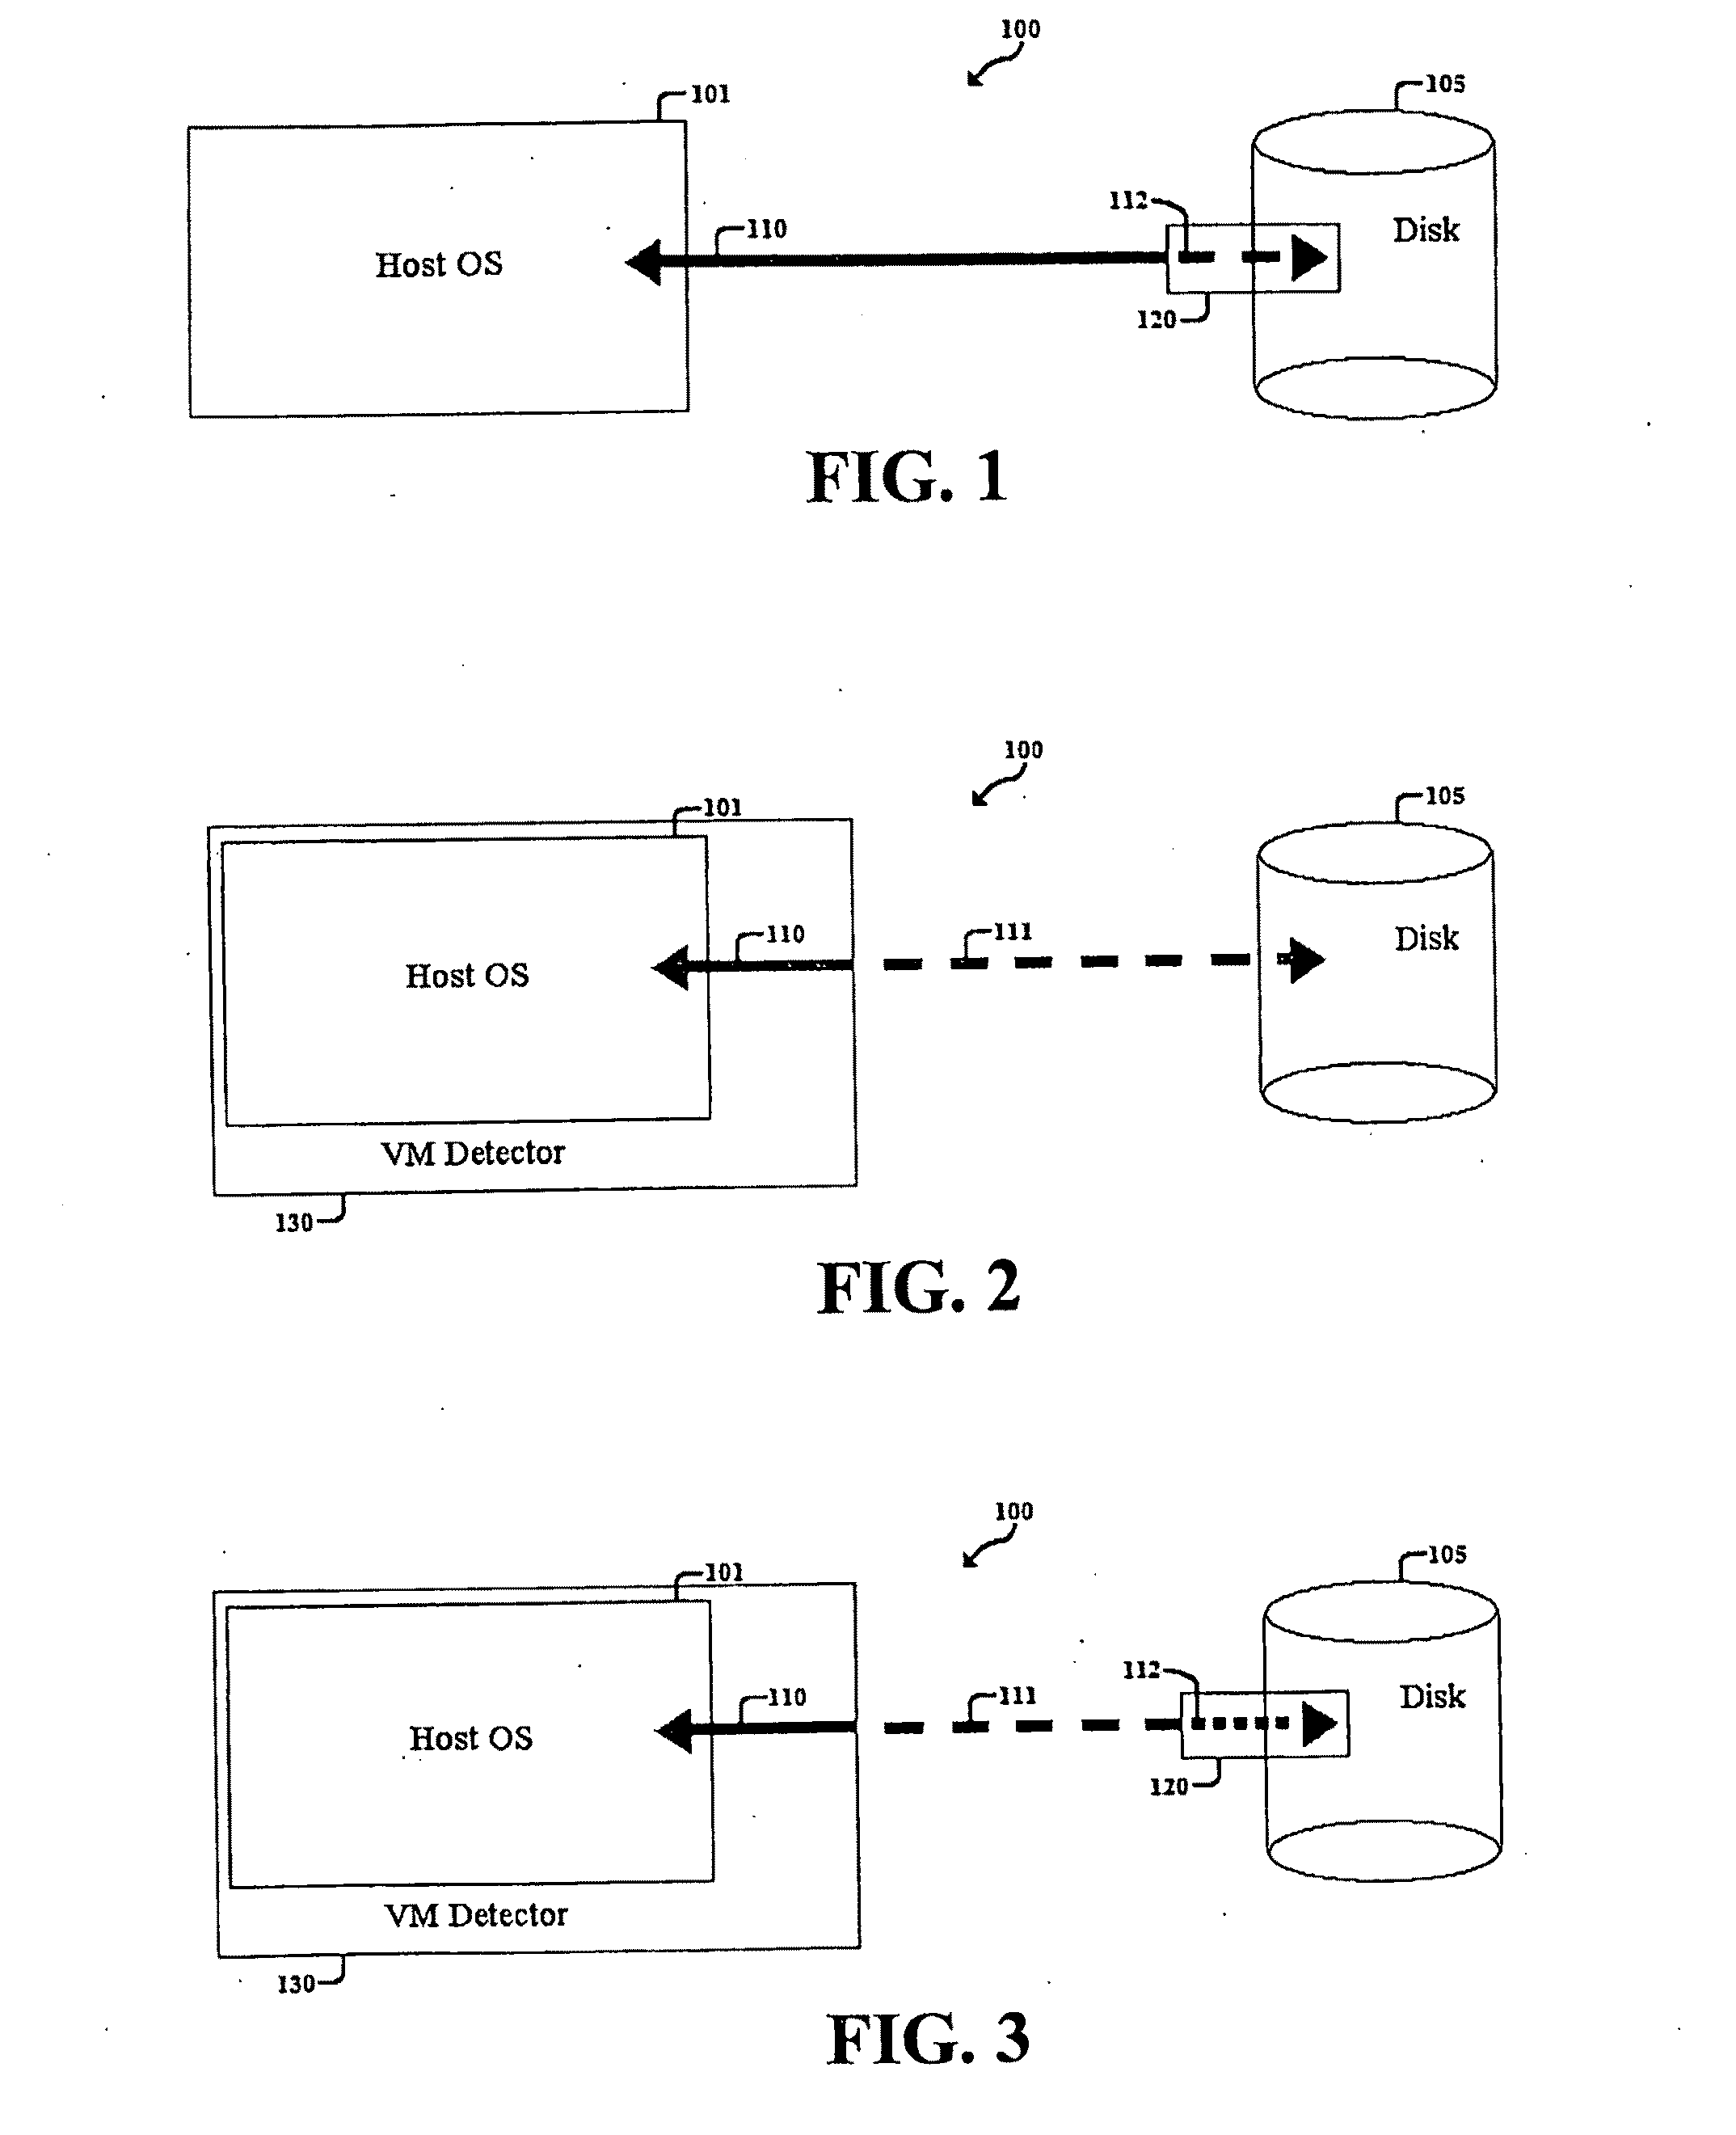 Method, System, and Computer Program Product for Malware Detection, Analysis, and Response